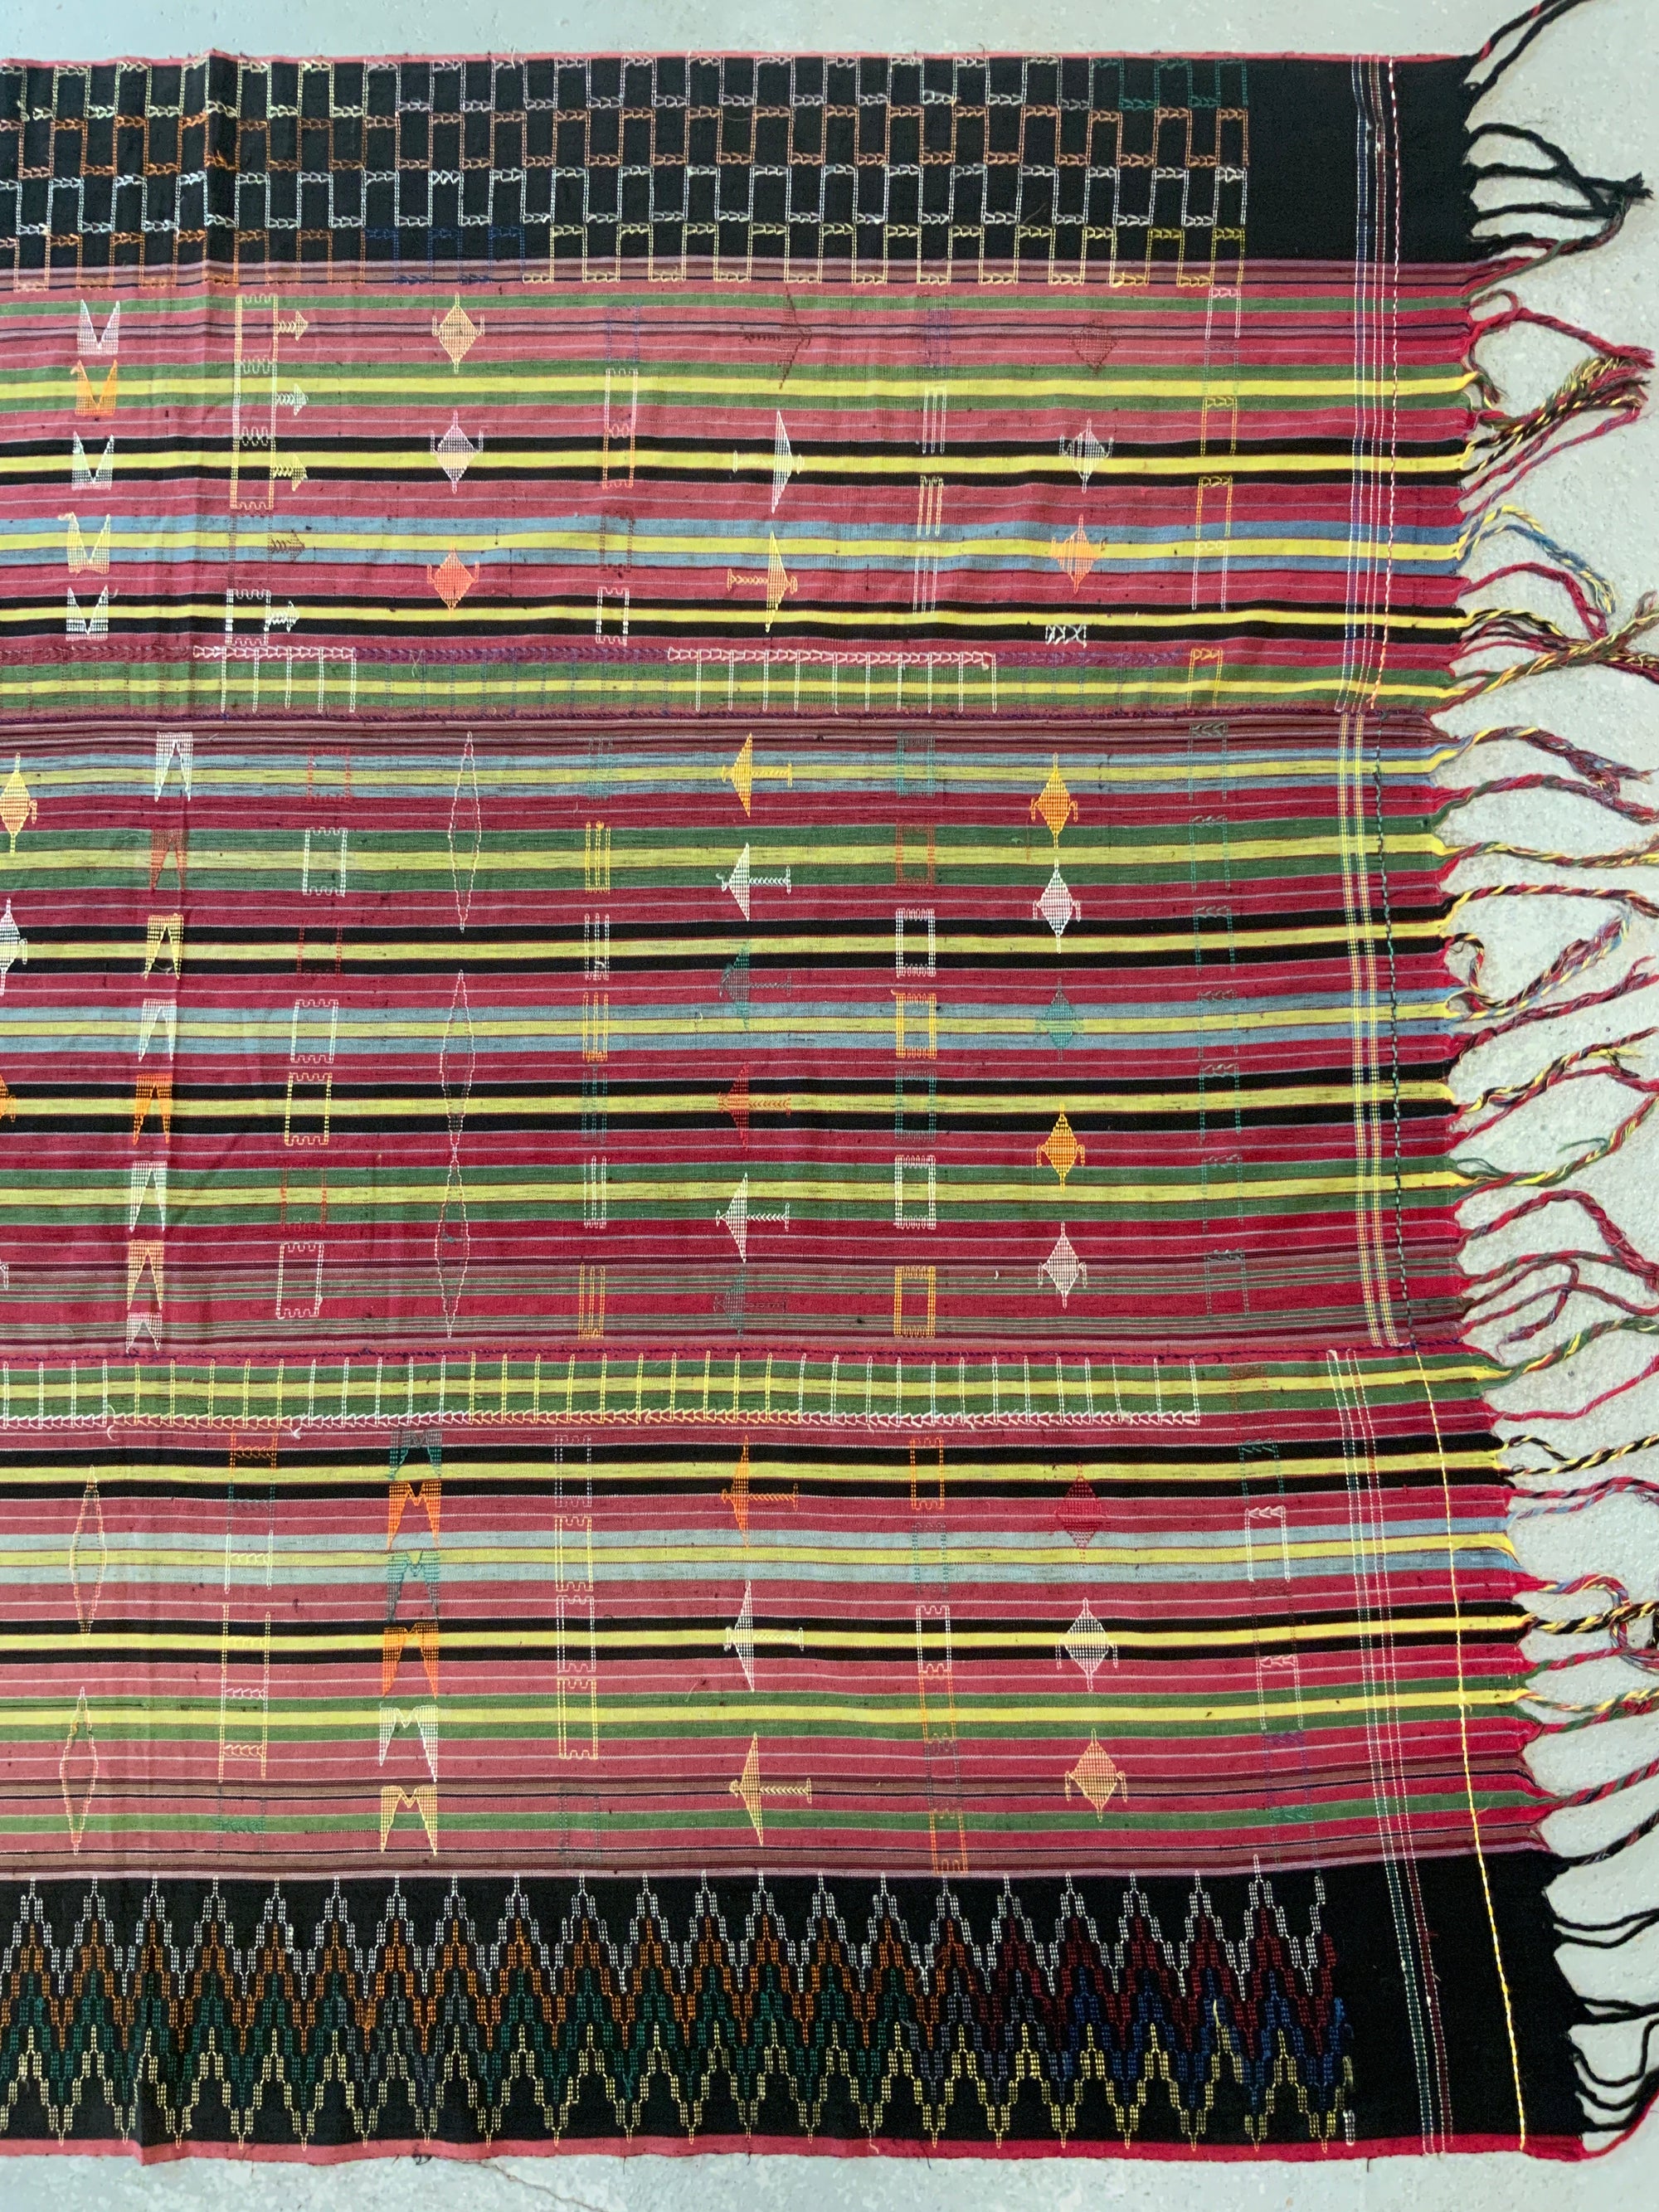 Nigeian Nupe striped cover (216 x 172cm)